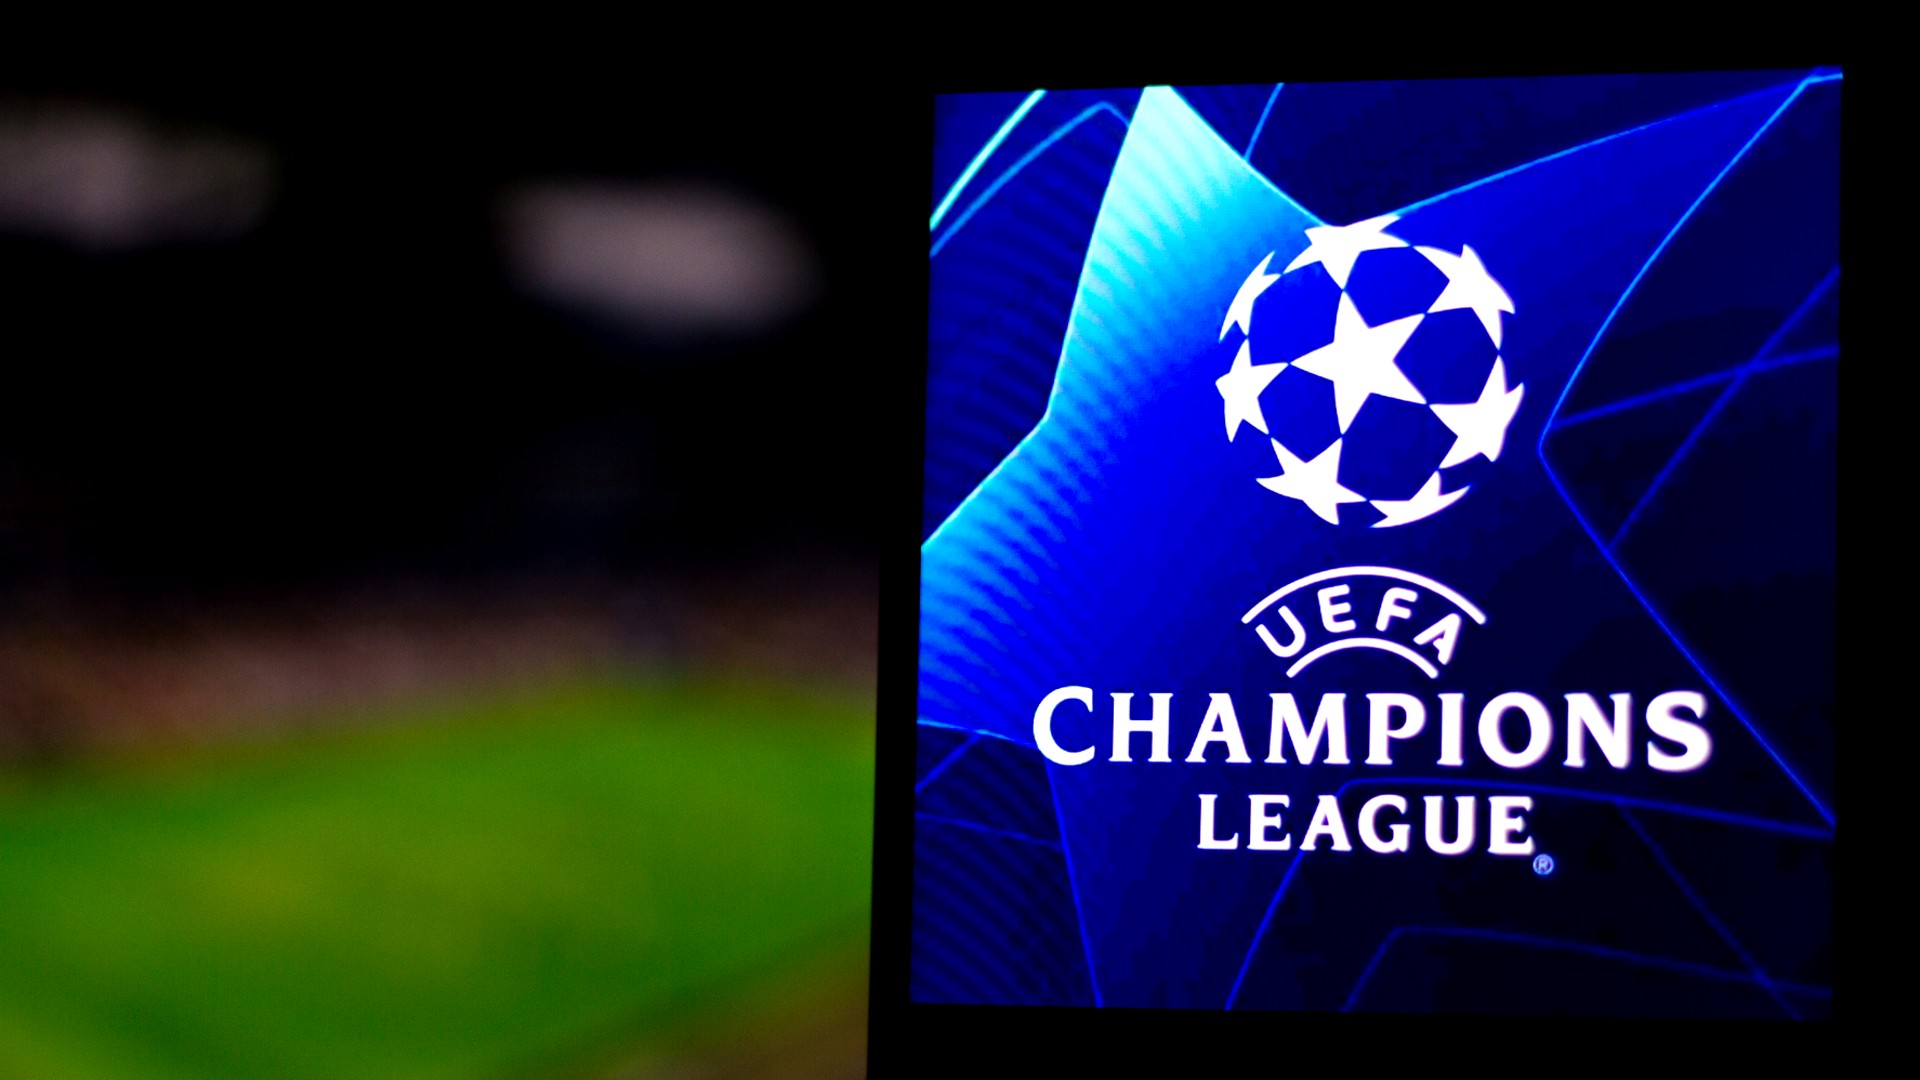 Champions League Final: BREAKING NEWS - UEFA relocate the Champions league Final from St Petersburg to Paris - 'Stade de France in Saint-Denis' due to the Ukraine-Russia Conflict - Check out